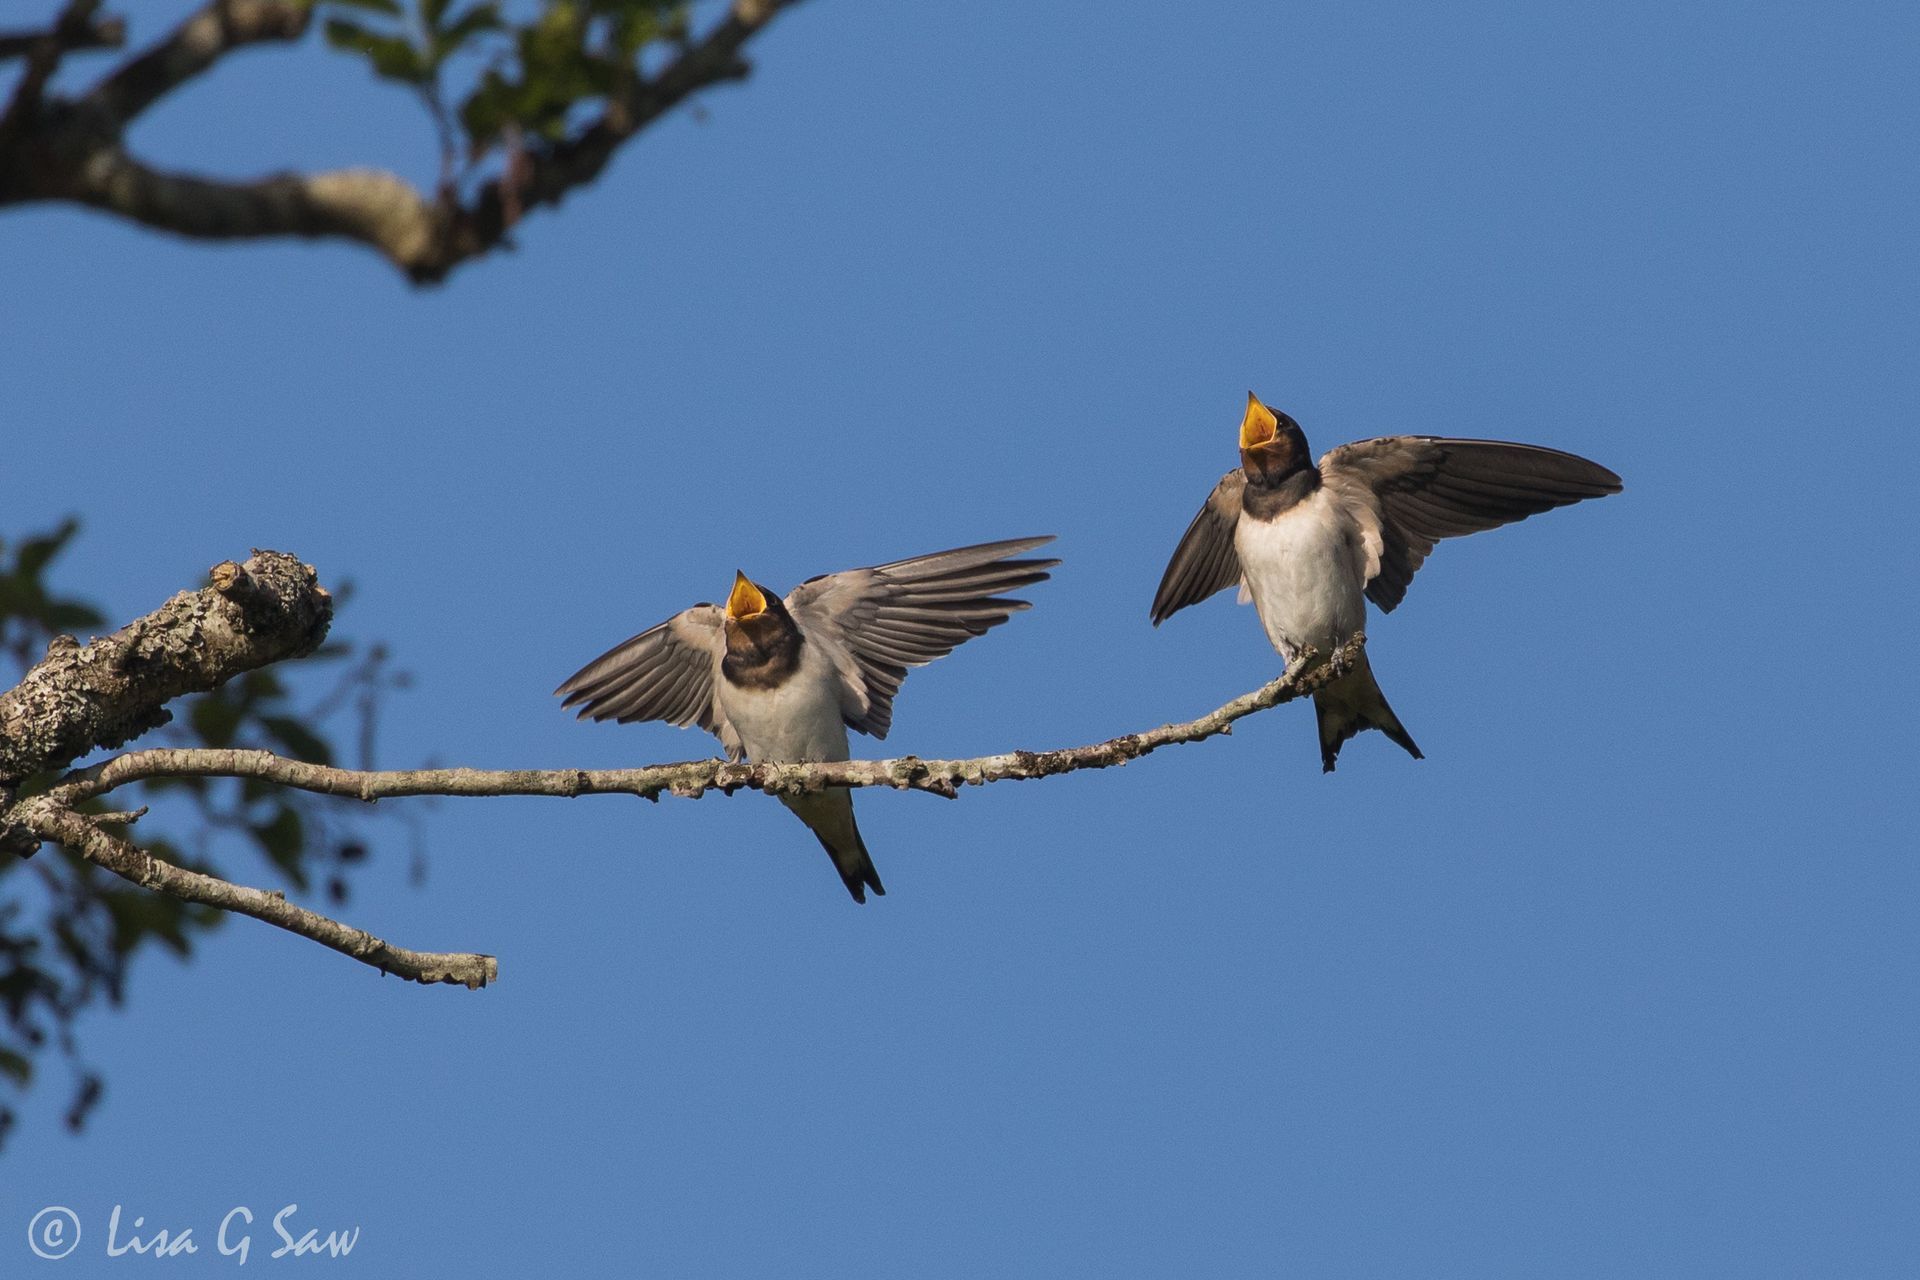 Two juvenile swallows with beaks open on branch